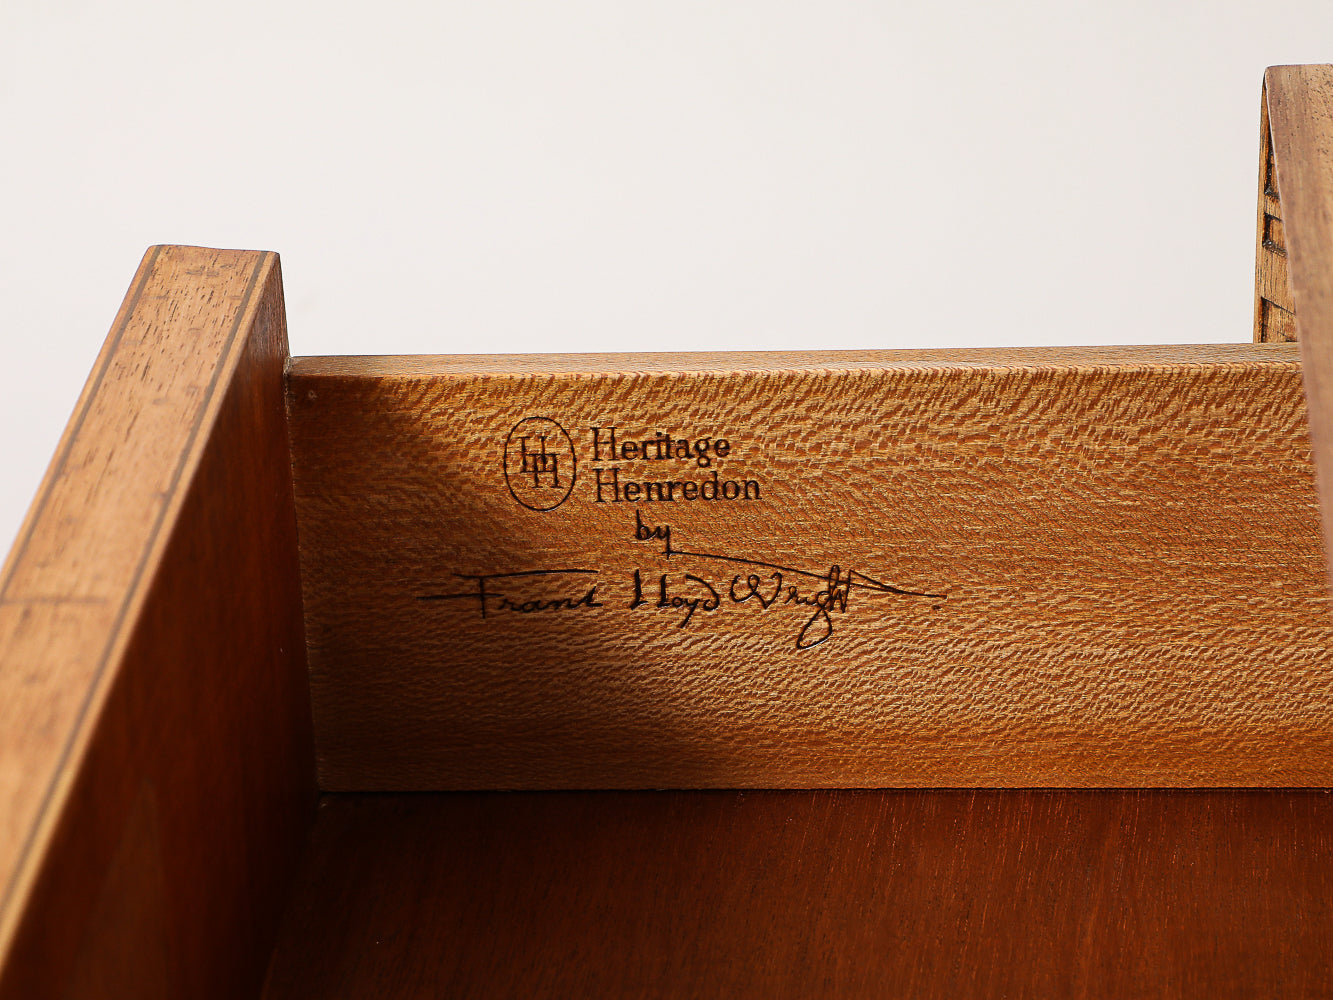 Tall Chest of Drawers by Frank Lloyd Wright for Heritage Henredon